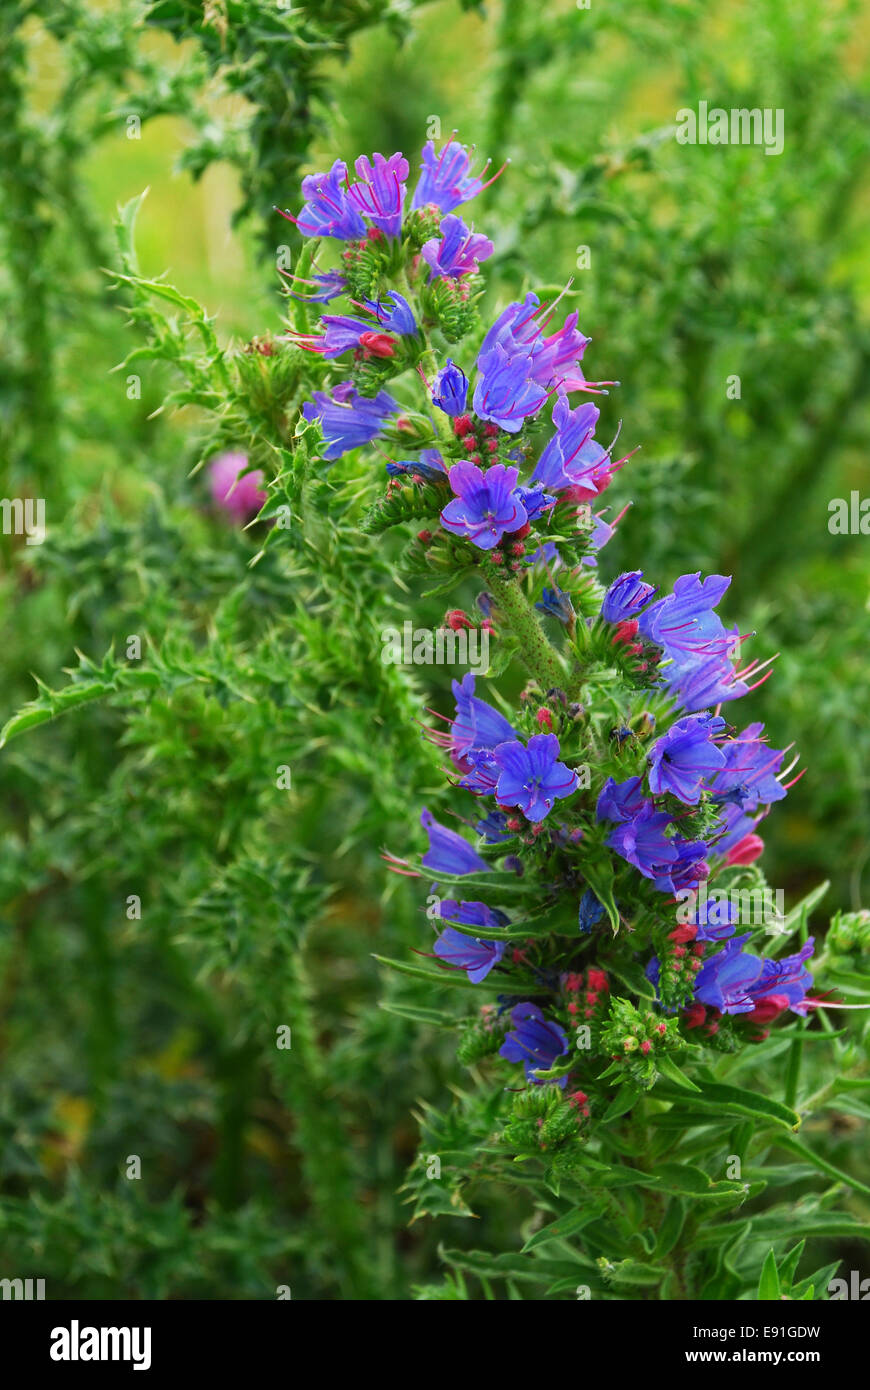 Blueweed or Viper's Bugloss Stock Photo